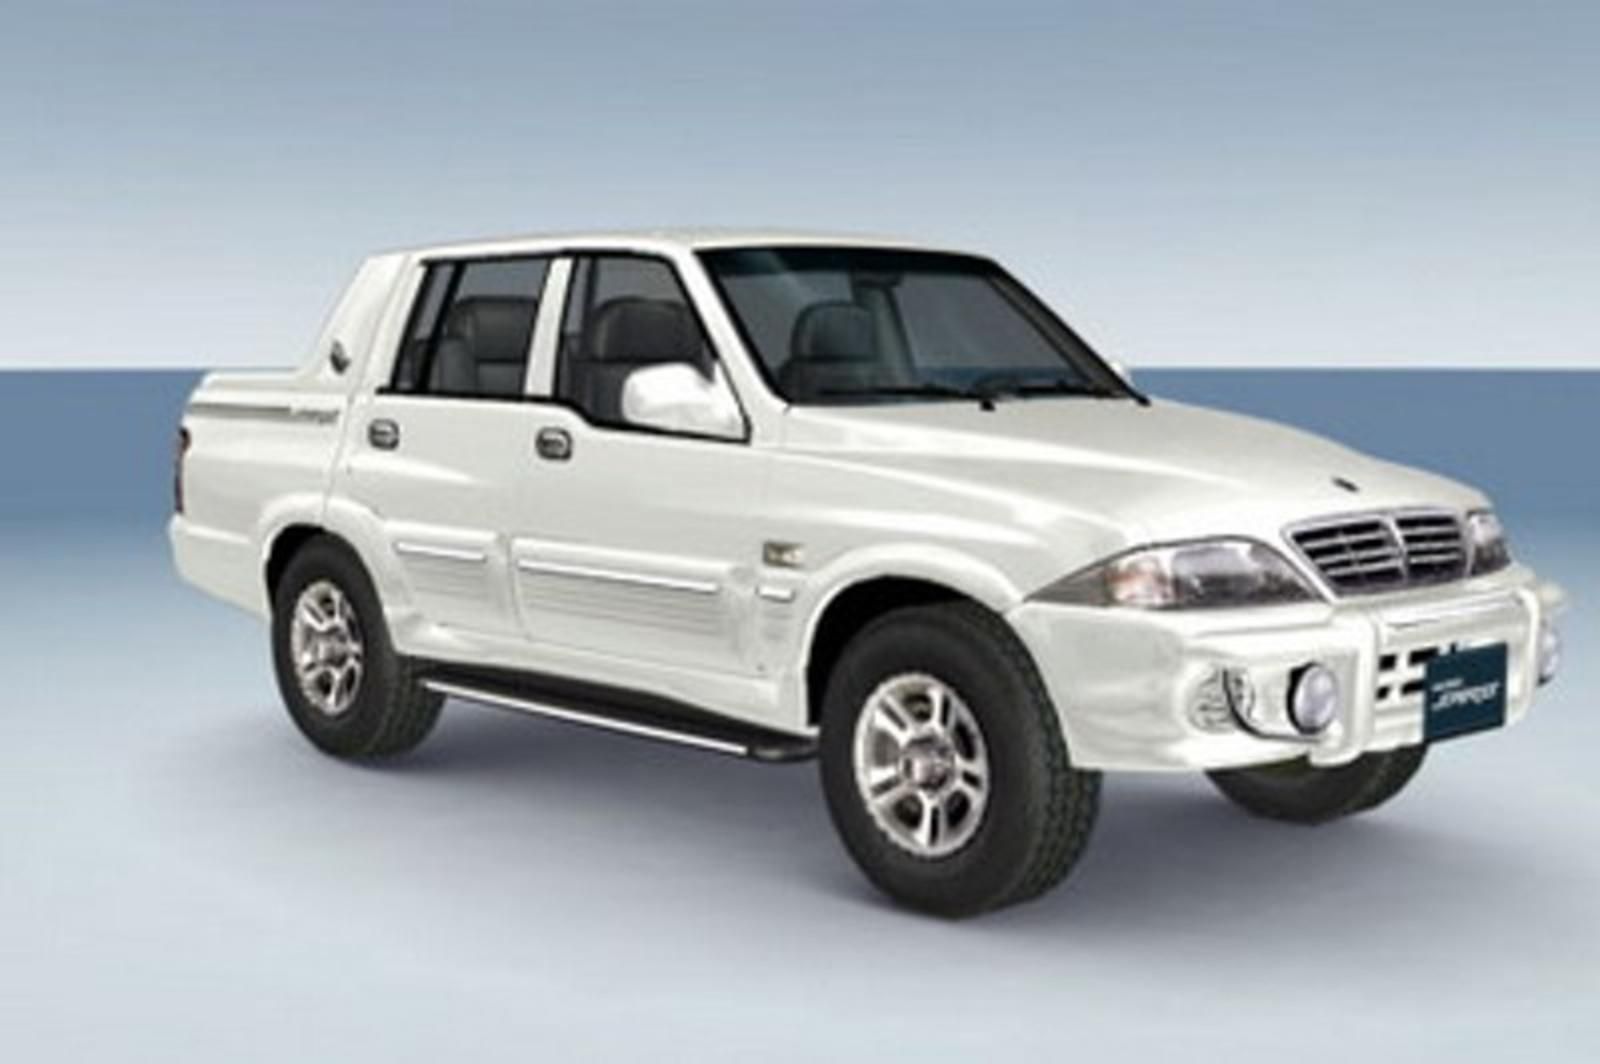 Ssangyong musso sport. Санг Йонг Муссо 2002. Саньенг Муссо спорт. SSANGYONG Musso Pickup. Санг Йонг Муссо 2006 пикап.